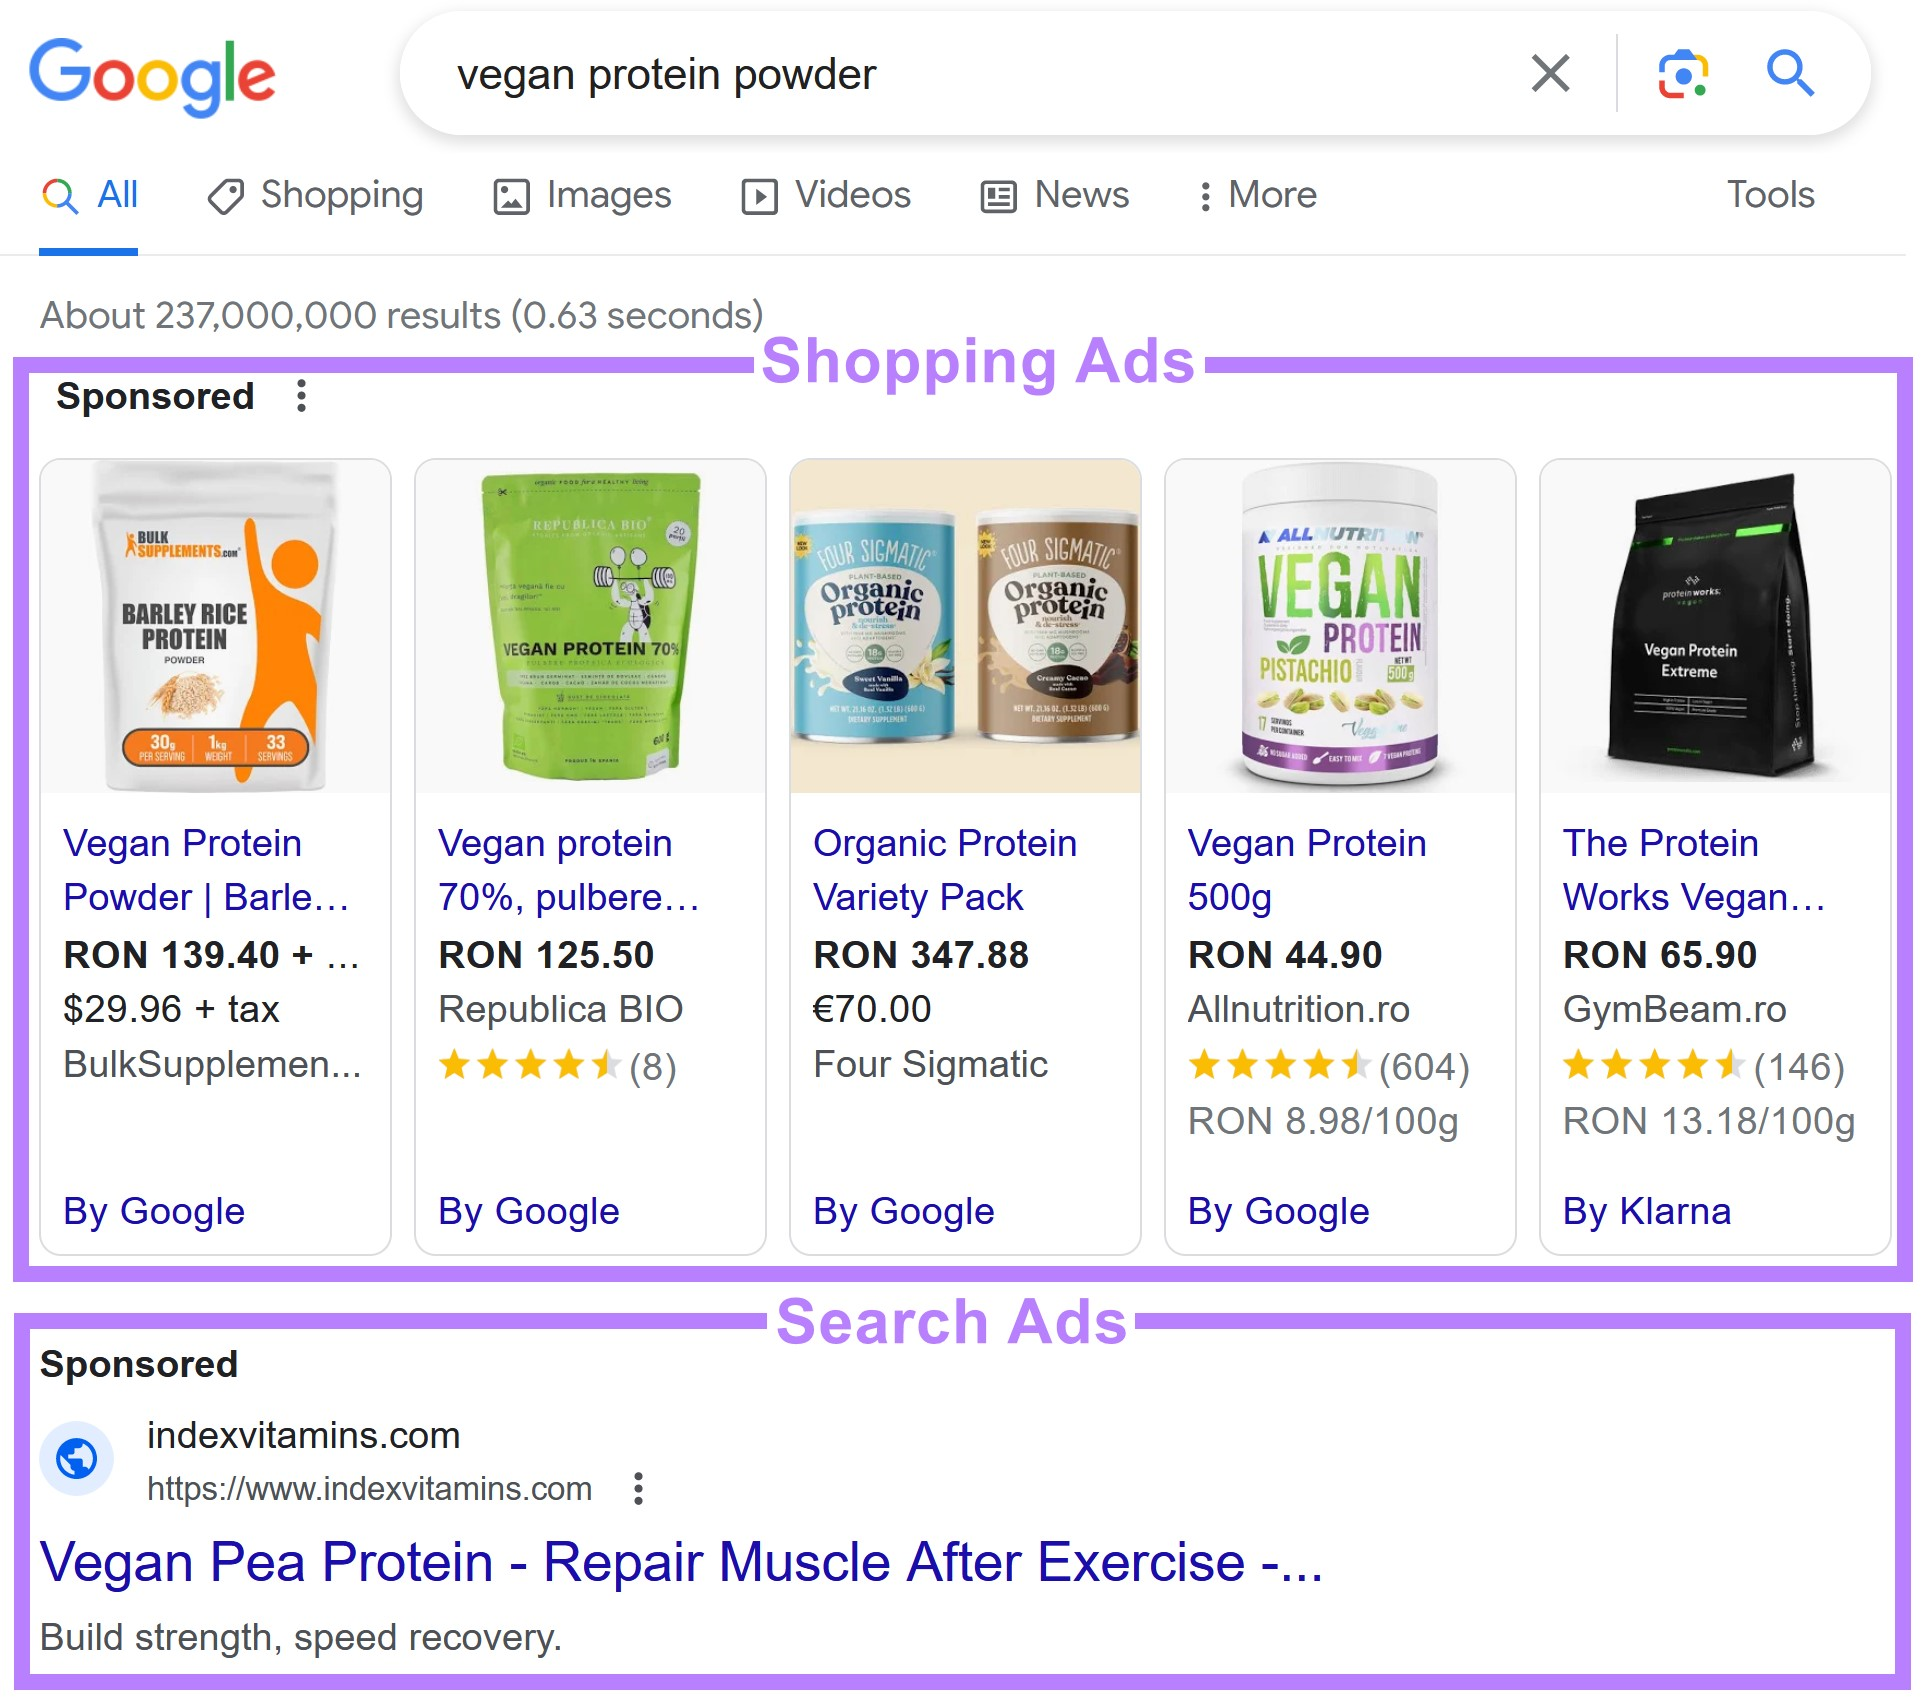 Shopping and search ads highlighted on Google SERP for "vegan protein powder"